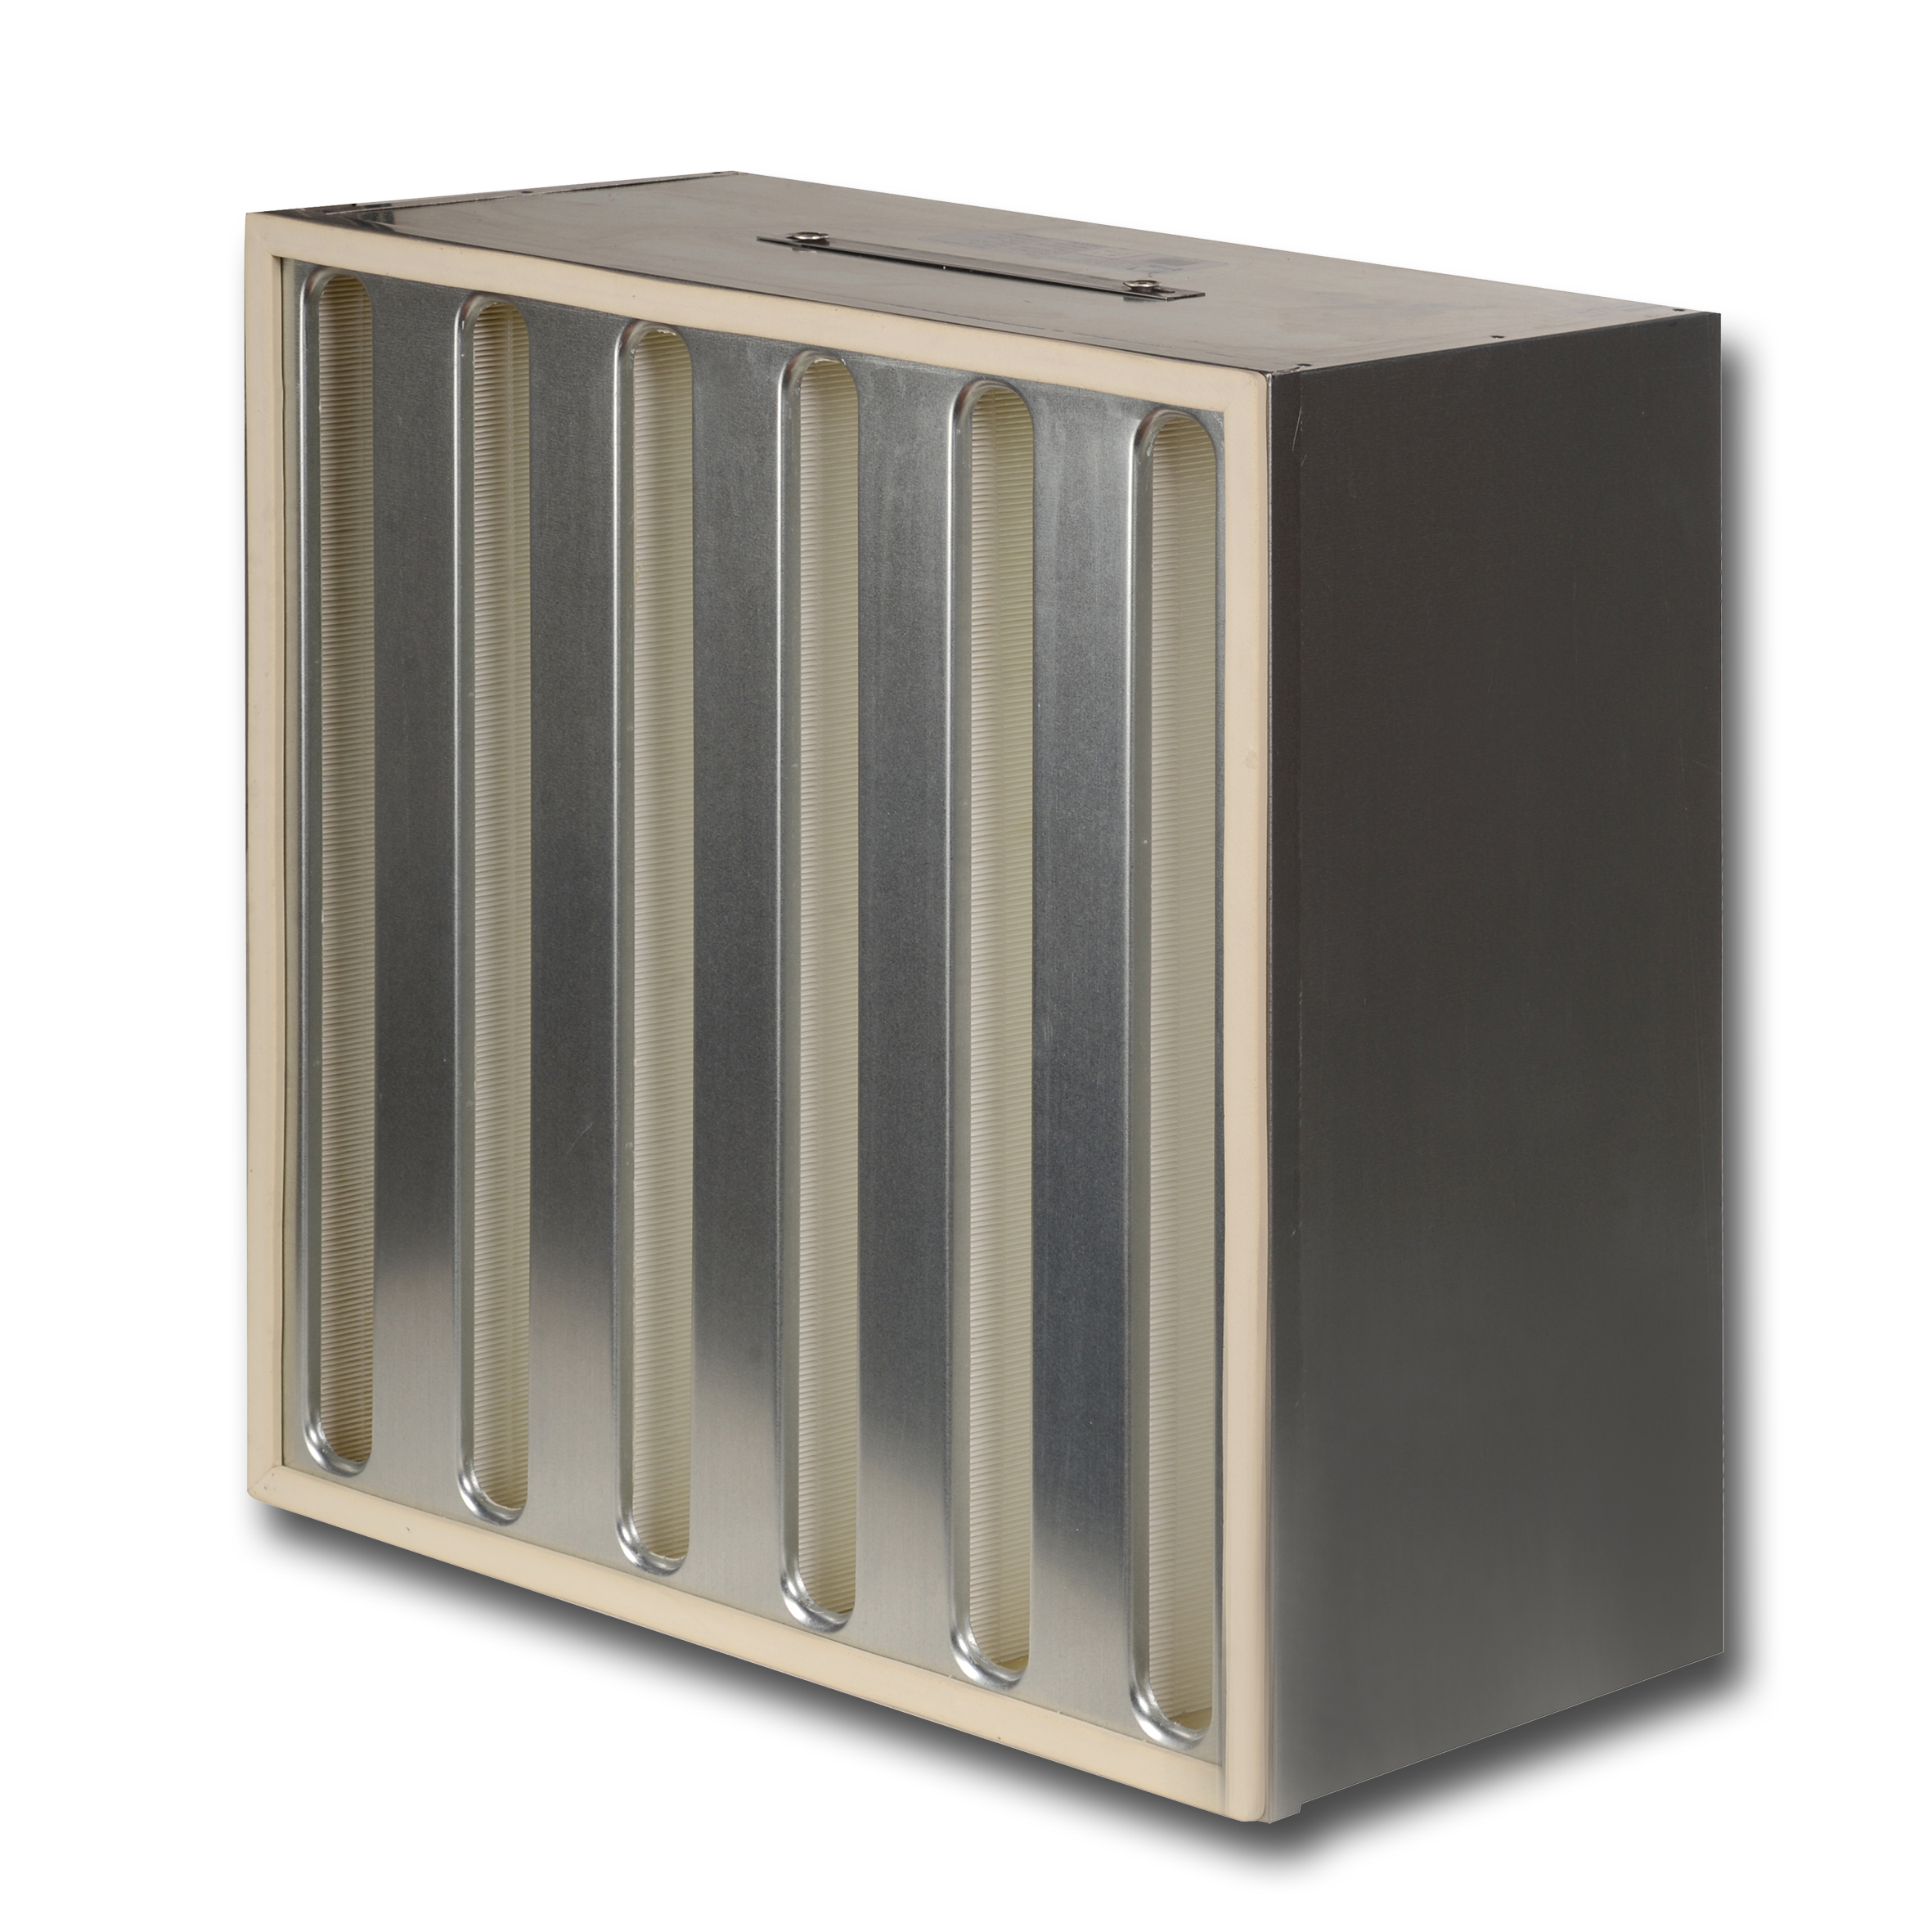 Designed with more specialized filter media than standard HEPA filters for the special systems in supply and exhaust air systems in industry, clean room, medical and nuclear installations.